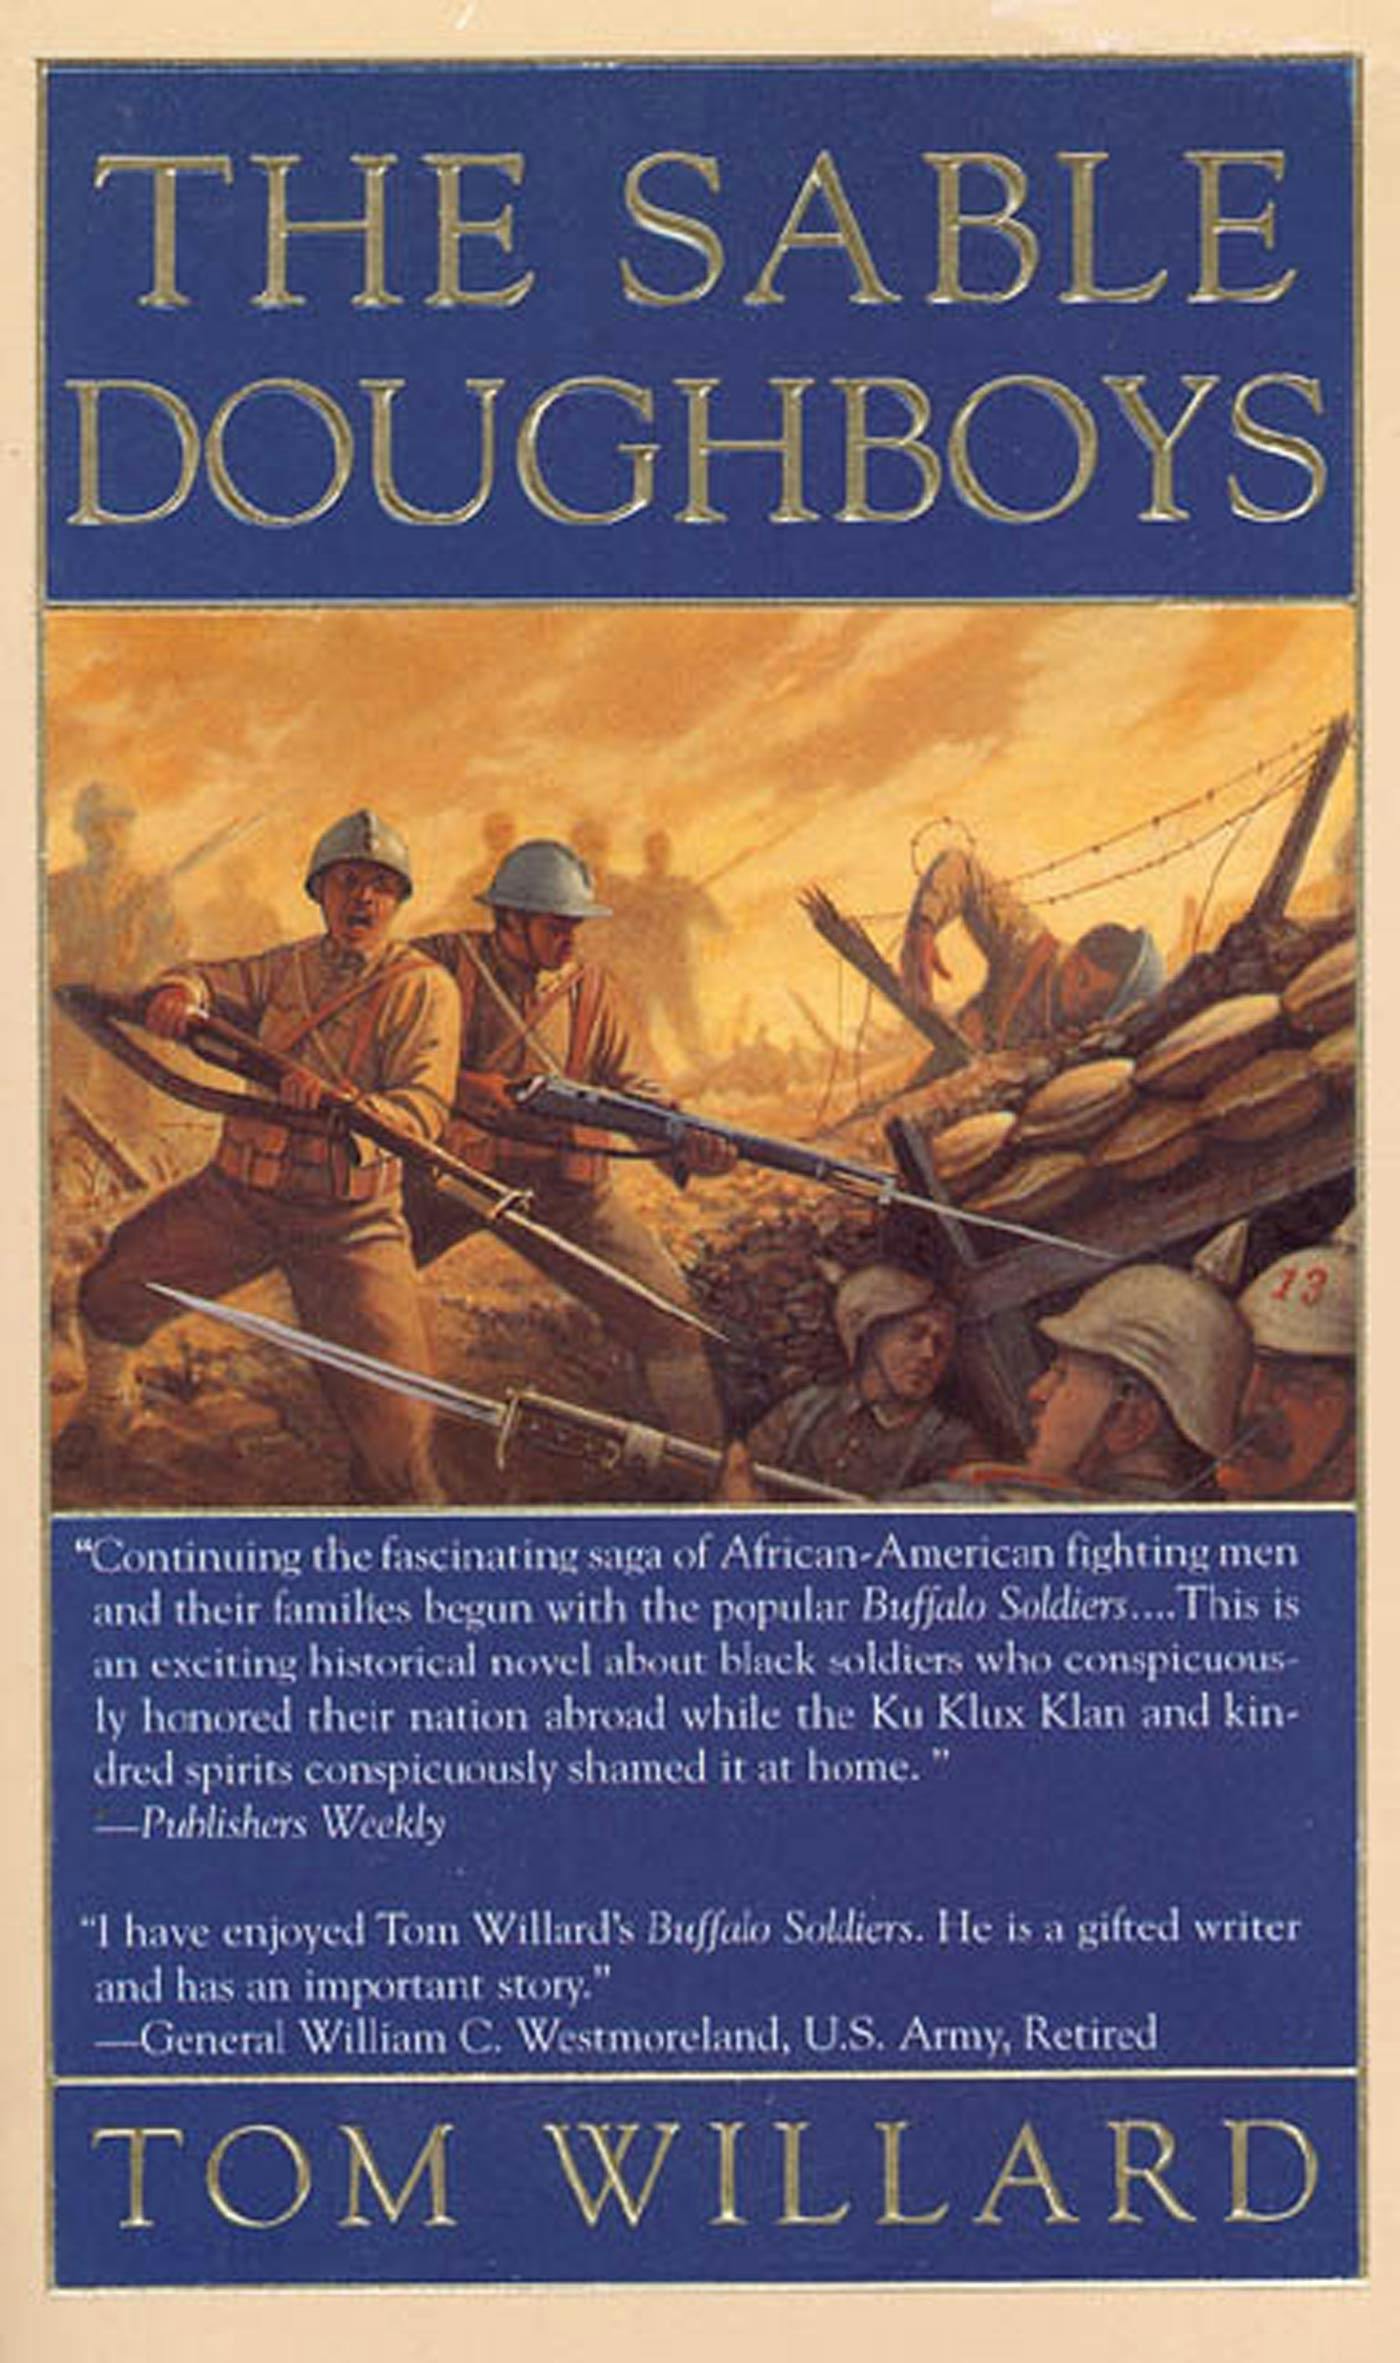 Cover for the book titled as: The Sable Doughboys